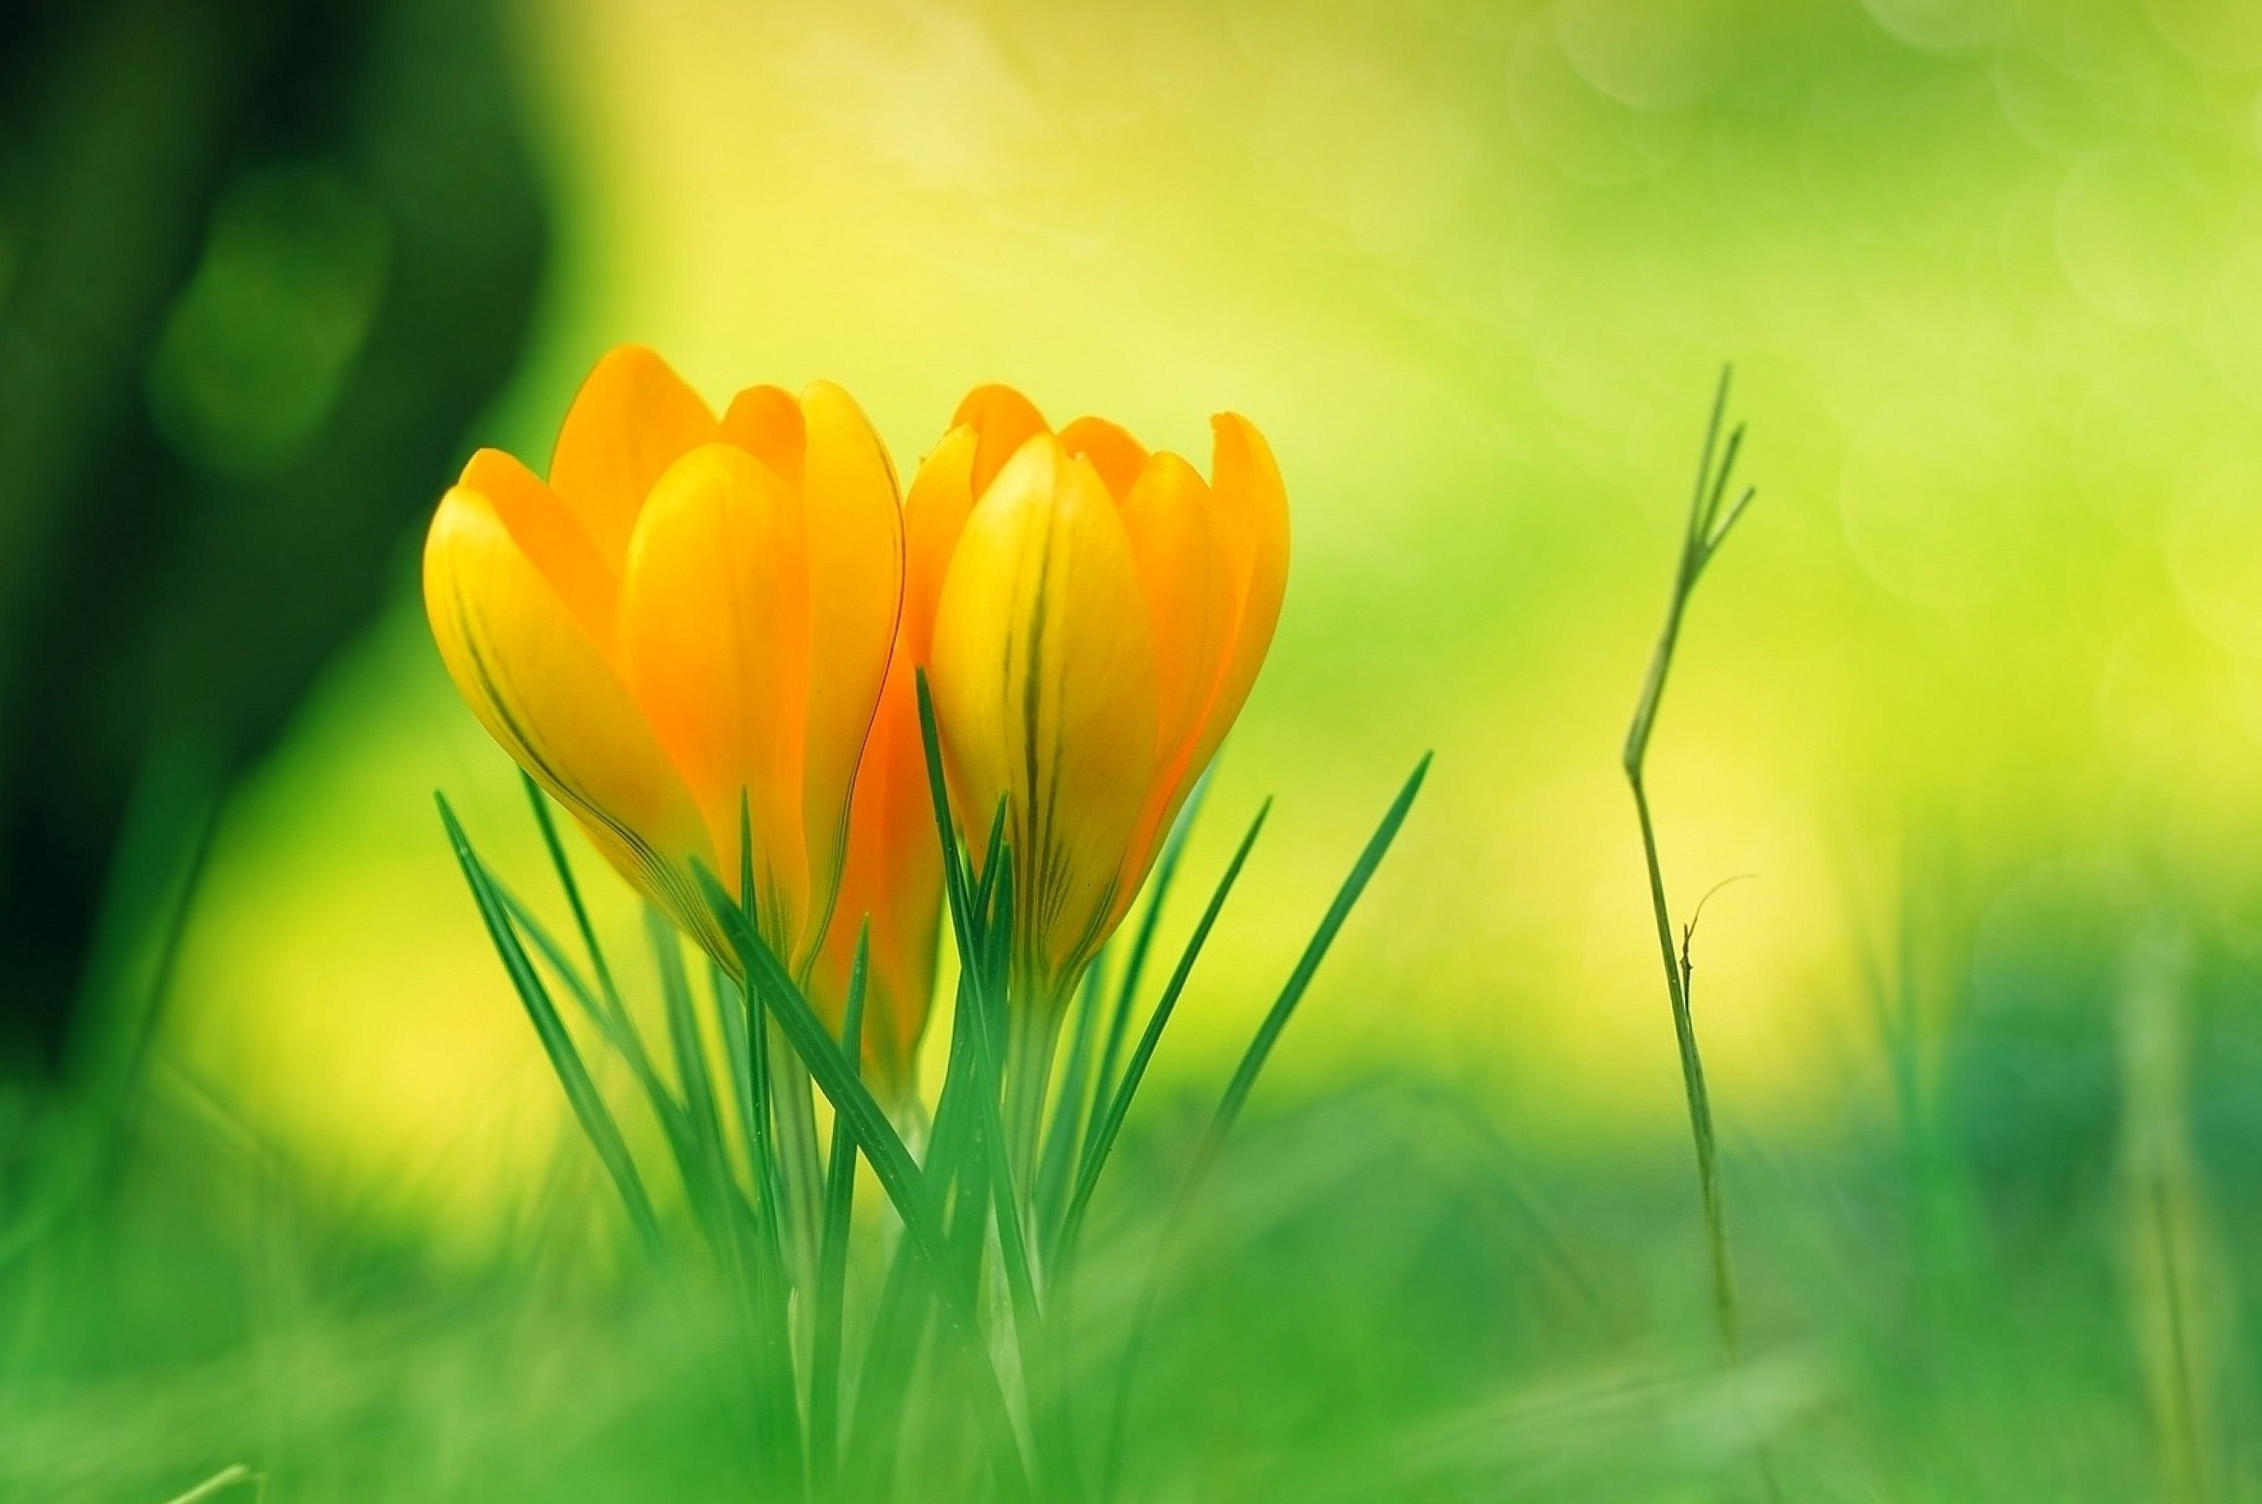 Flower Nature Background Images Hd - HD Wallpaper 